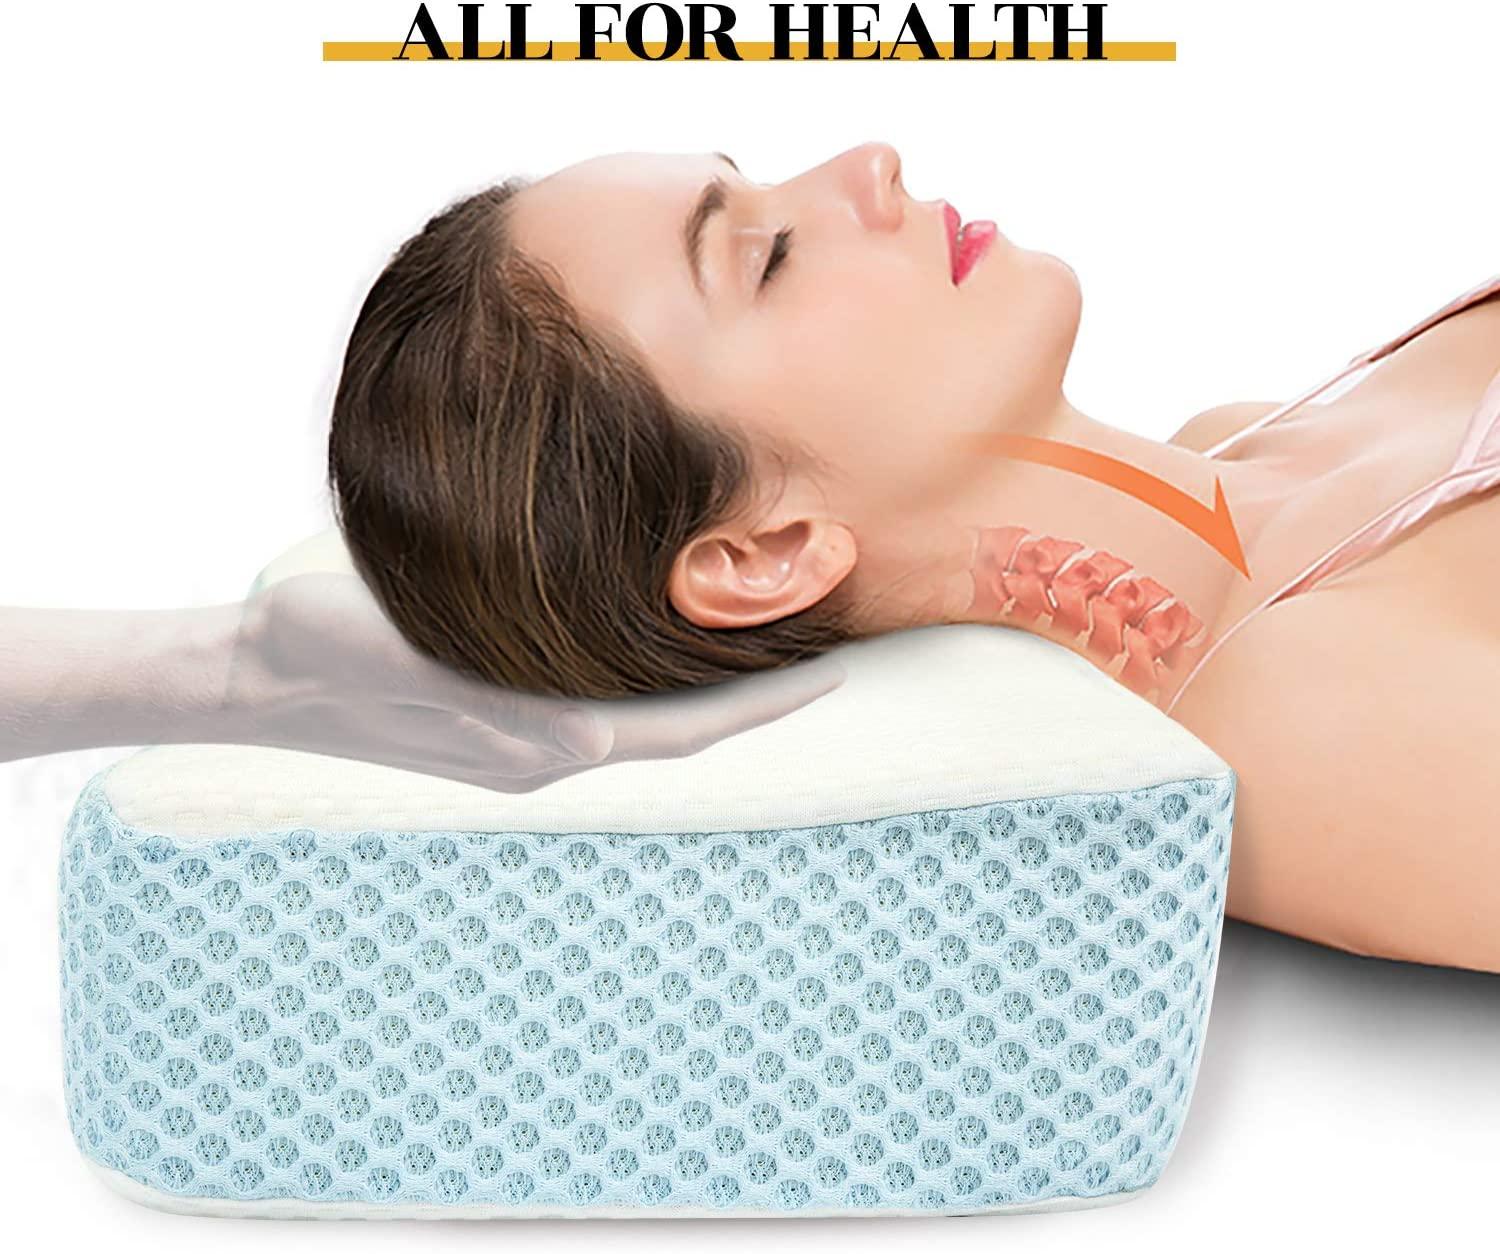 Neck-O Pillow: Best for cervical support and Pain Relief